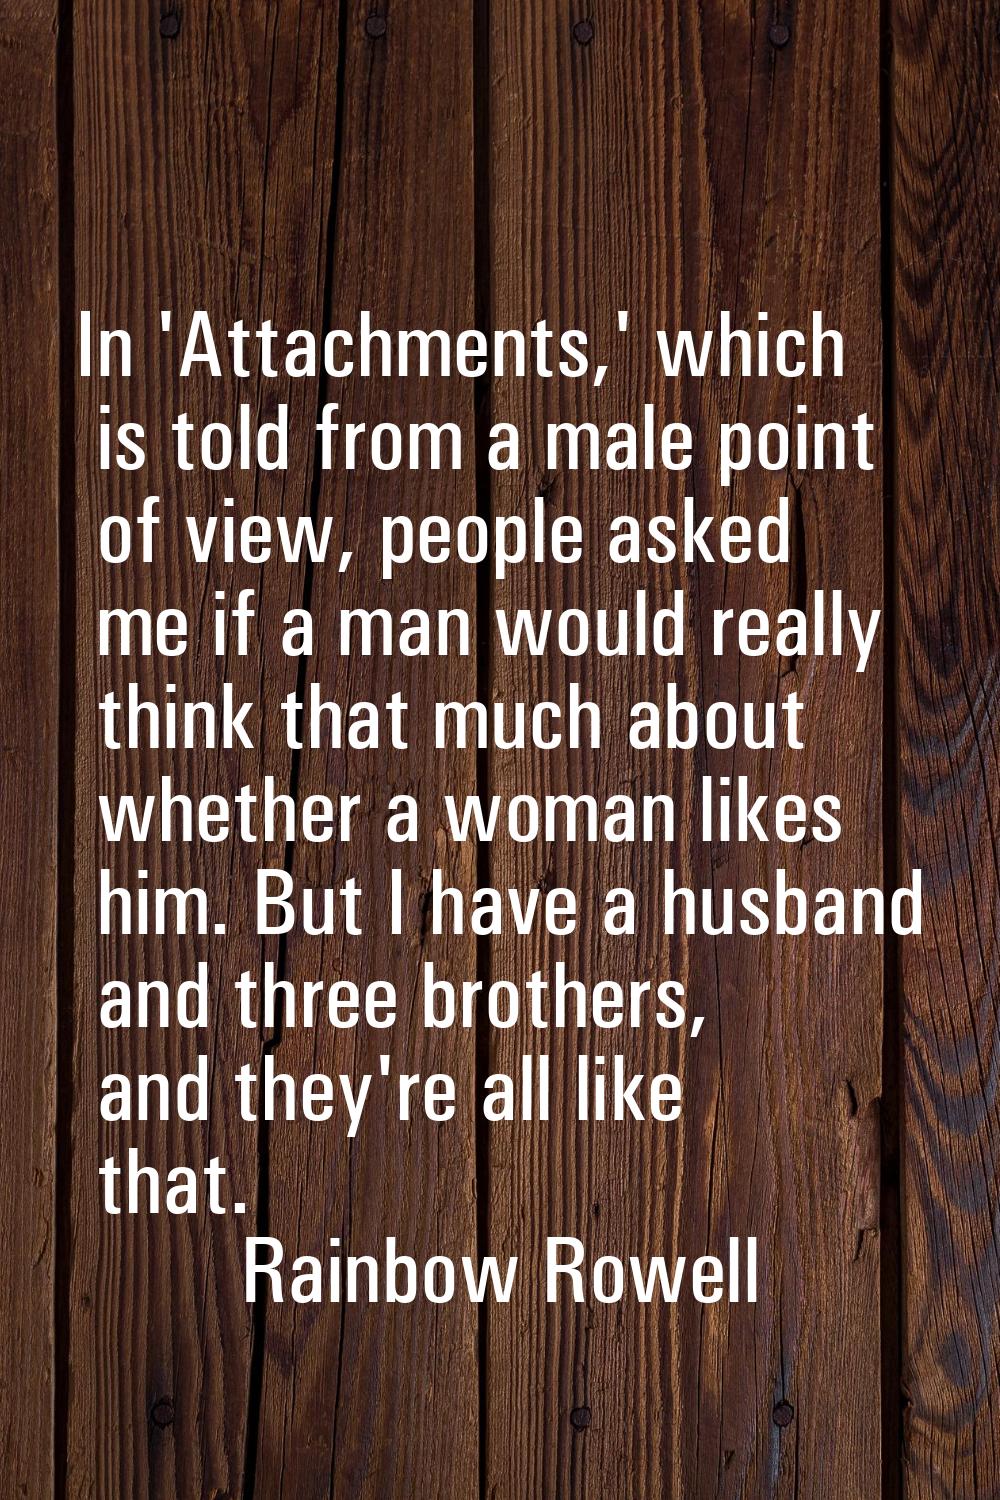 In 'Attachments,' which is told from a male point of view, people asked me if a man would really th